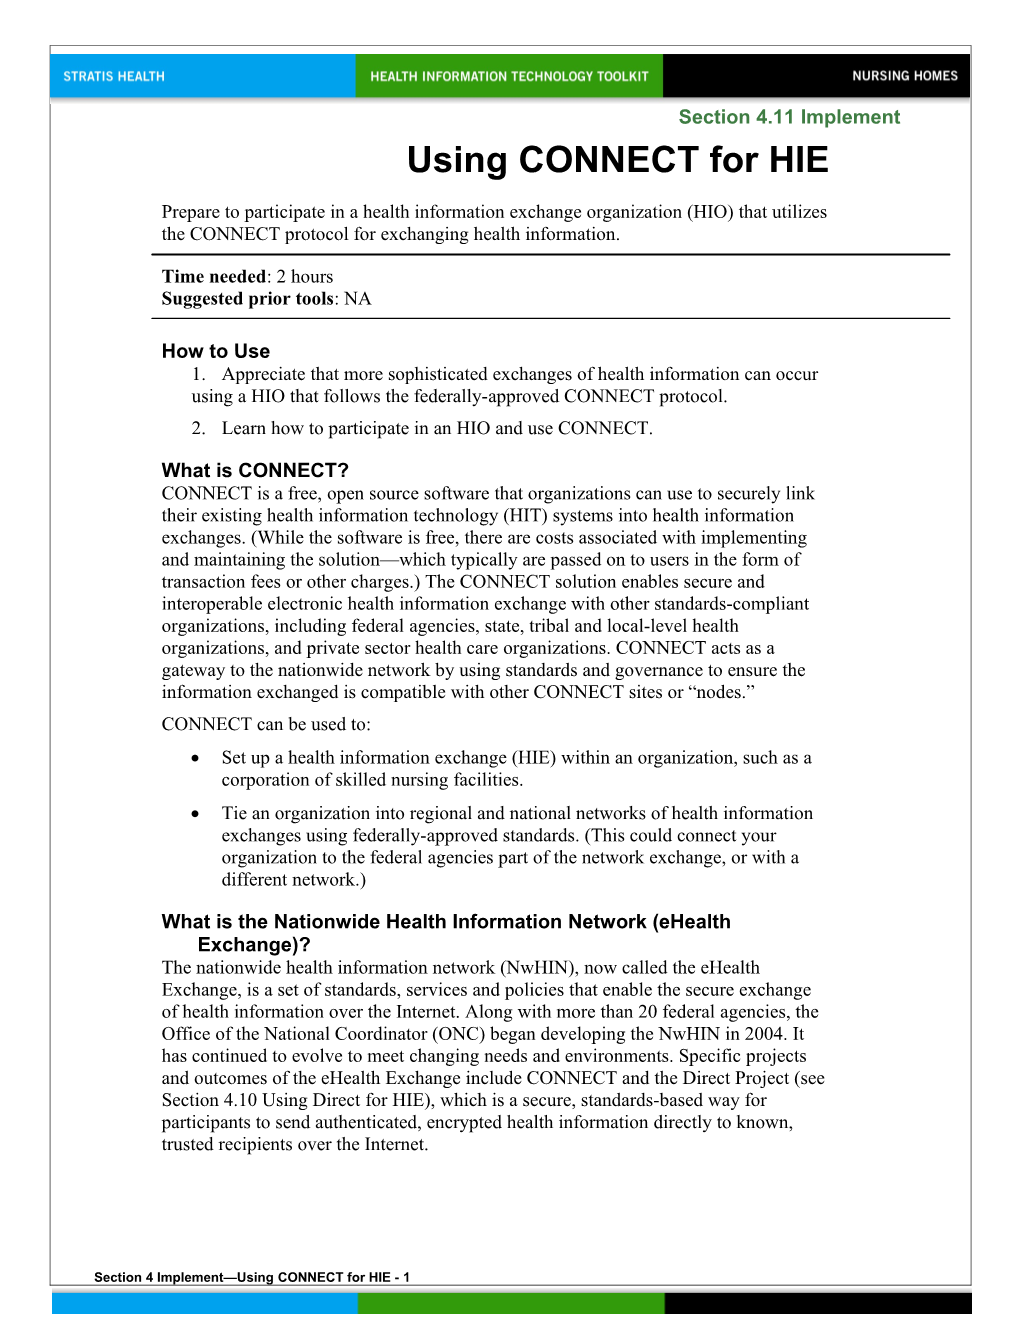 4 Using CONNECT for HIE